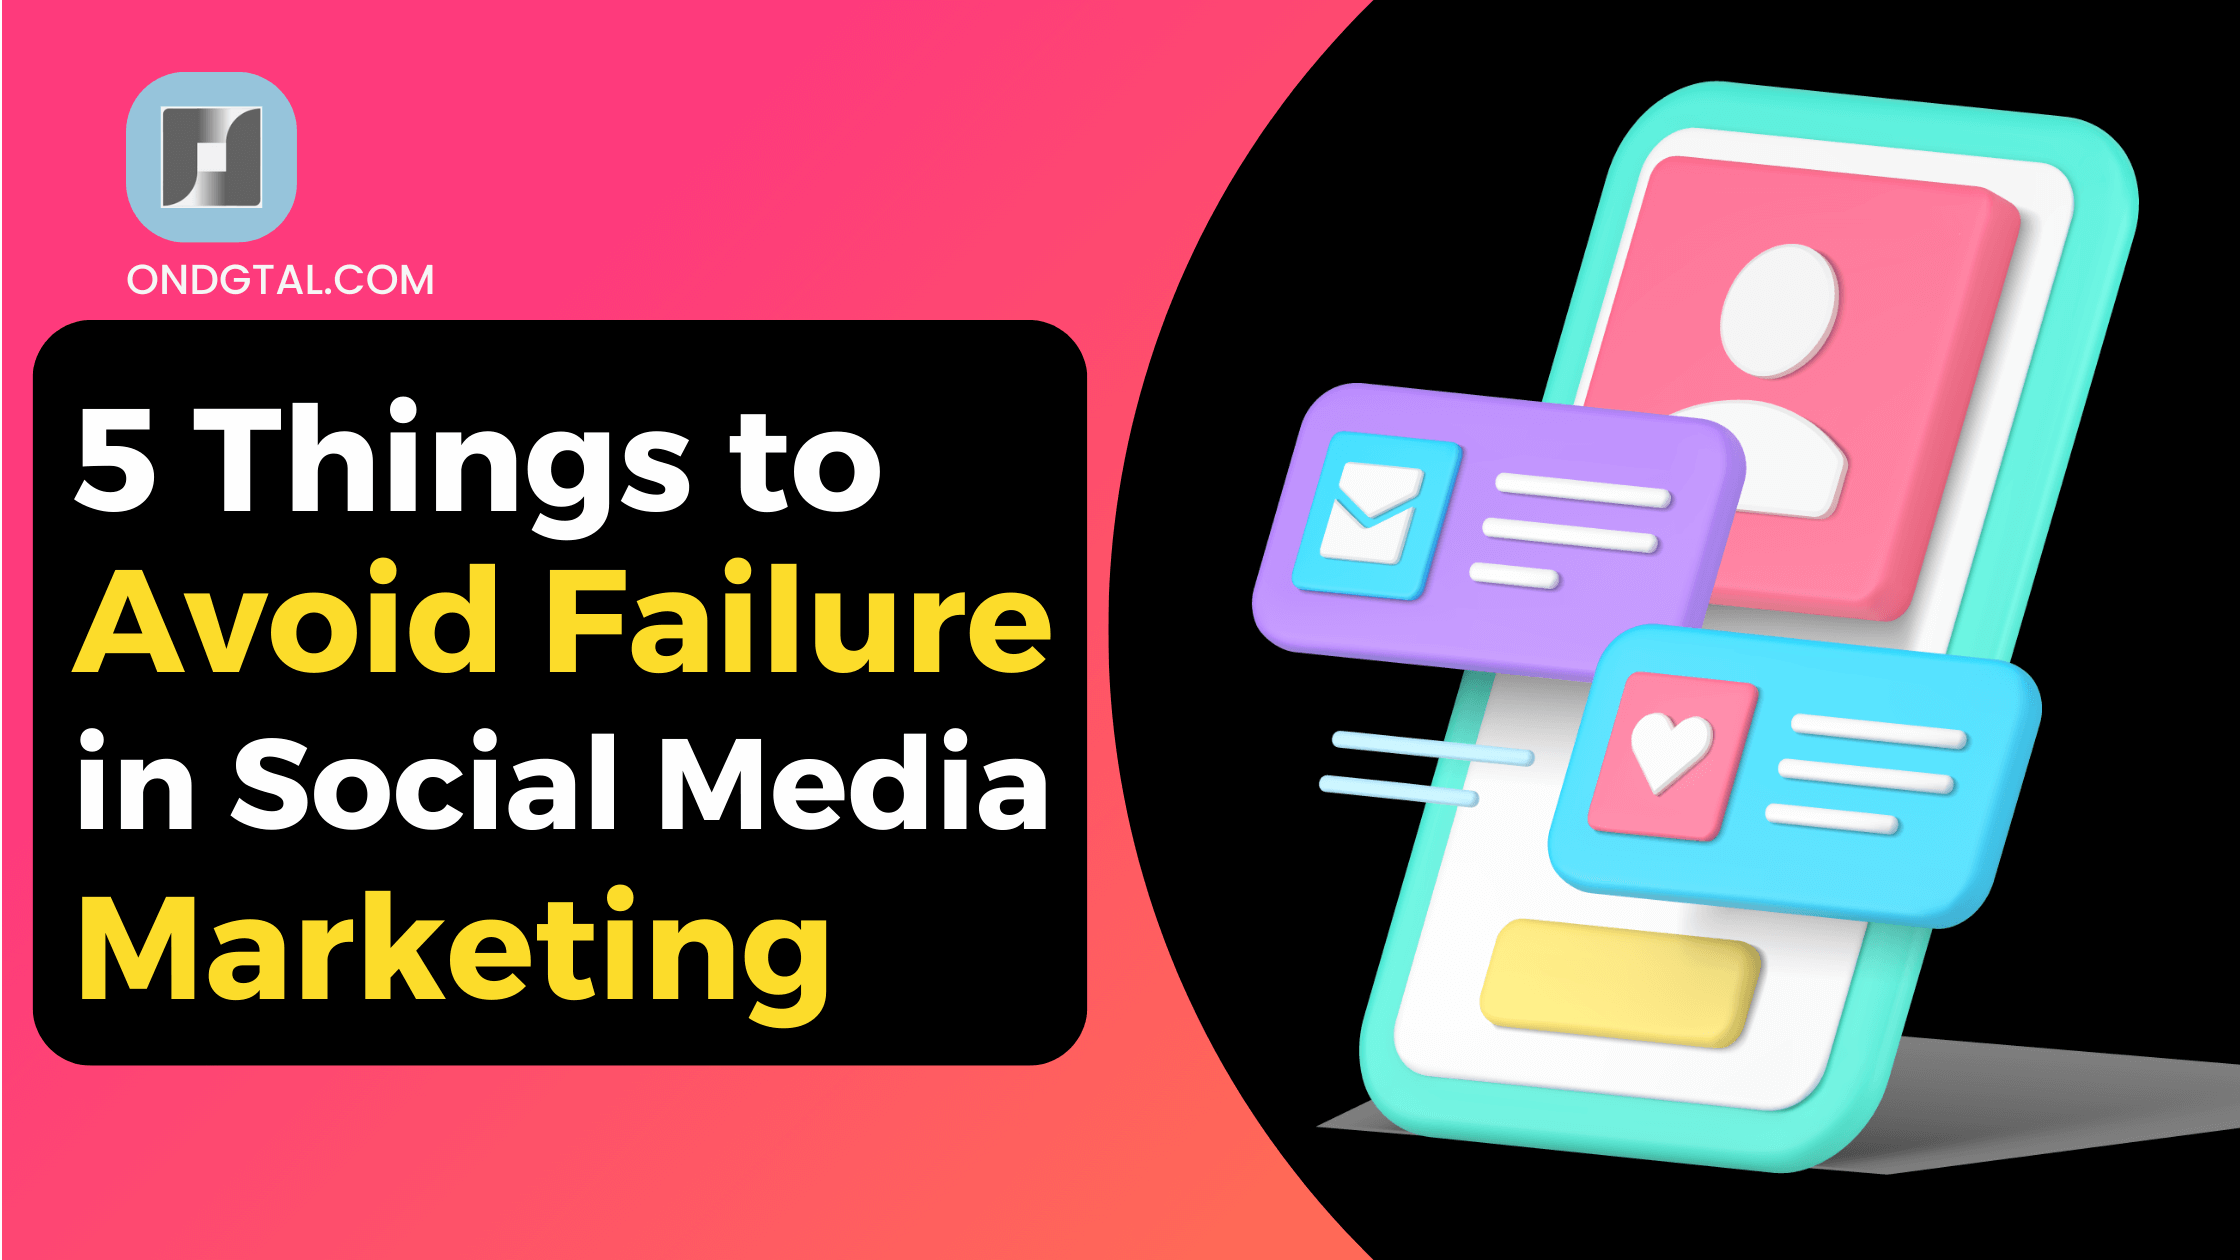 5 Things to Avoid Failure In Social Media Marketing.
                